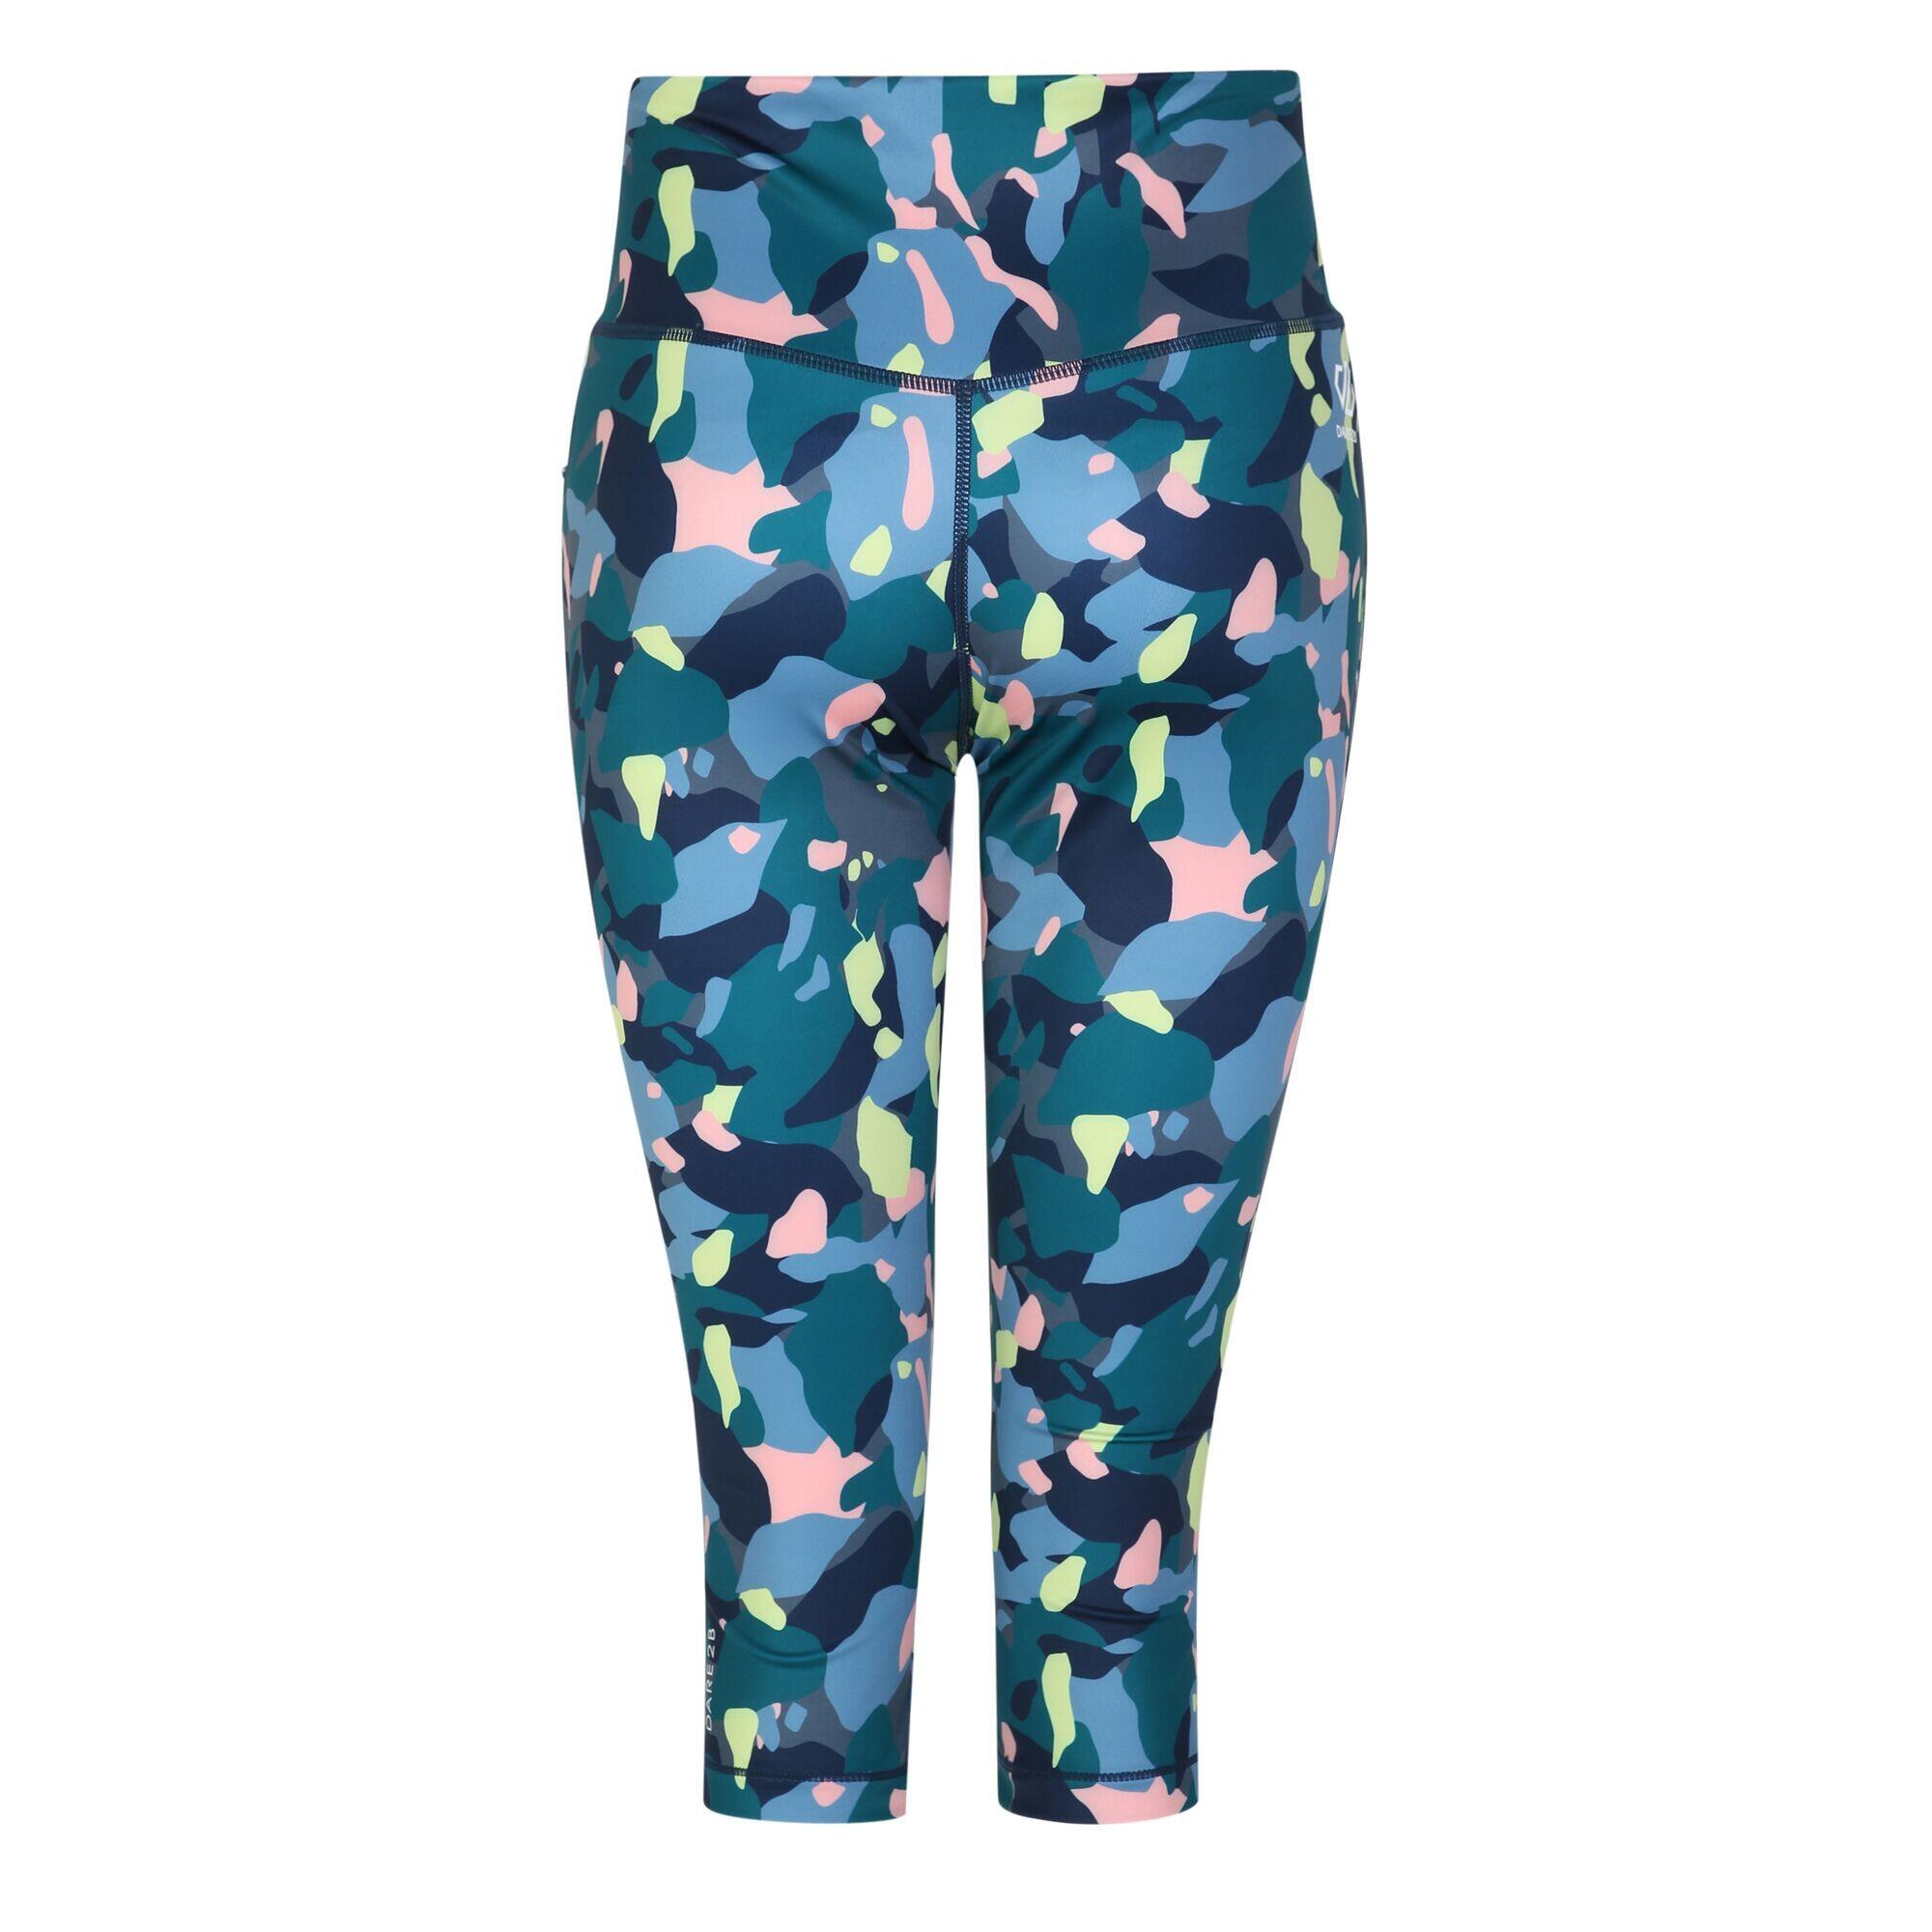 Womens/Ladies Influential 3/4 Recycled Printed Leggings (Fortune Green) 2/5